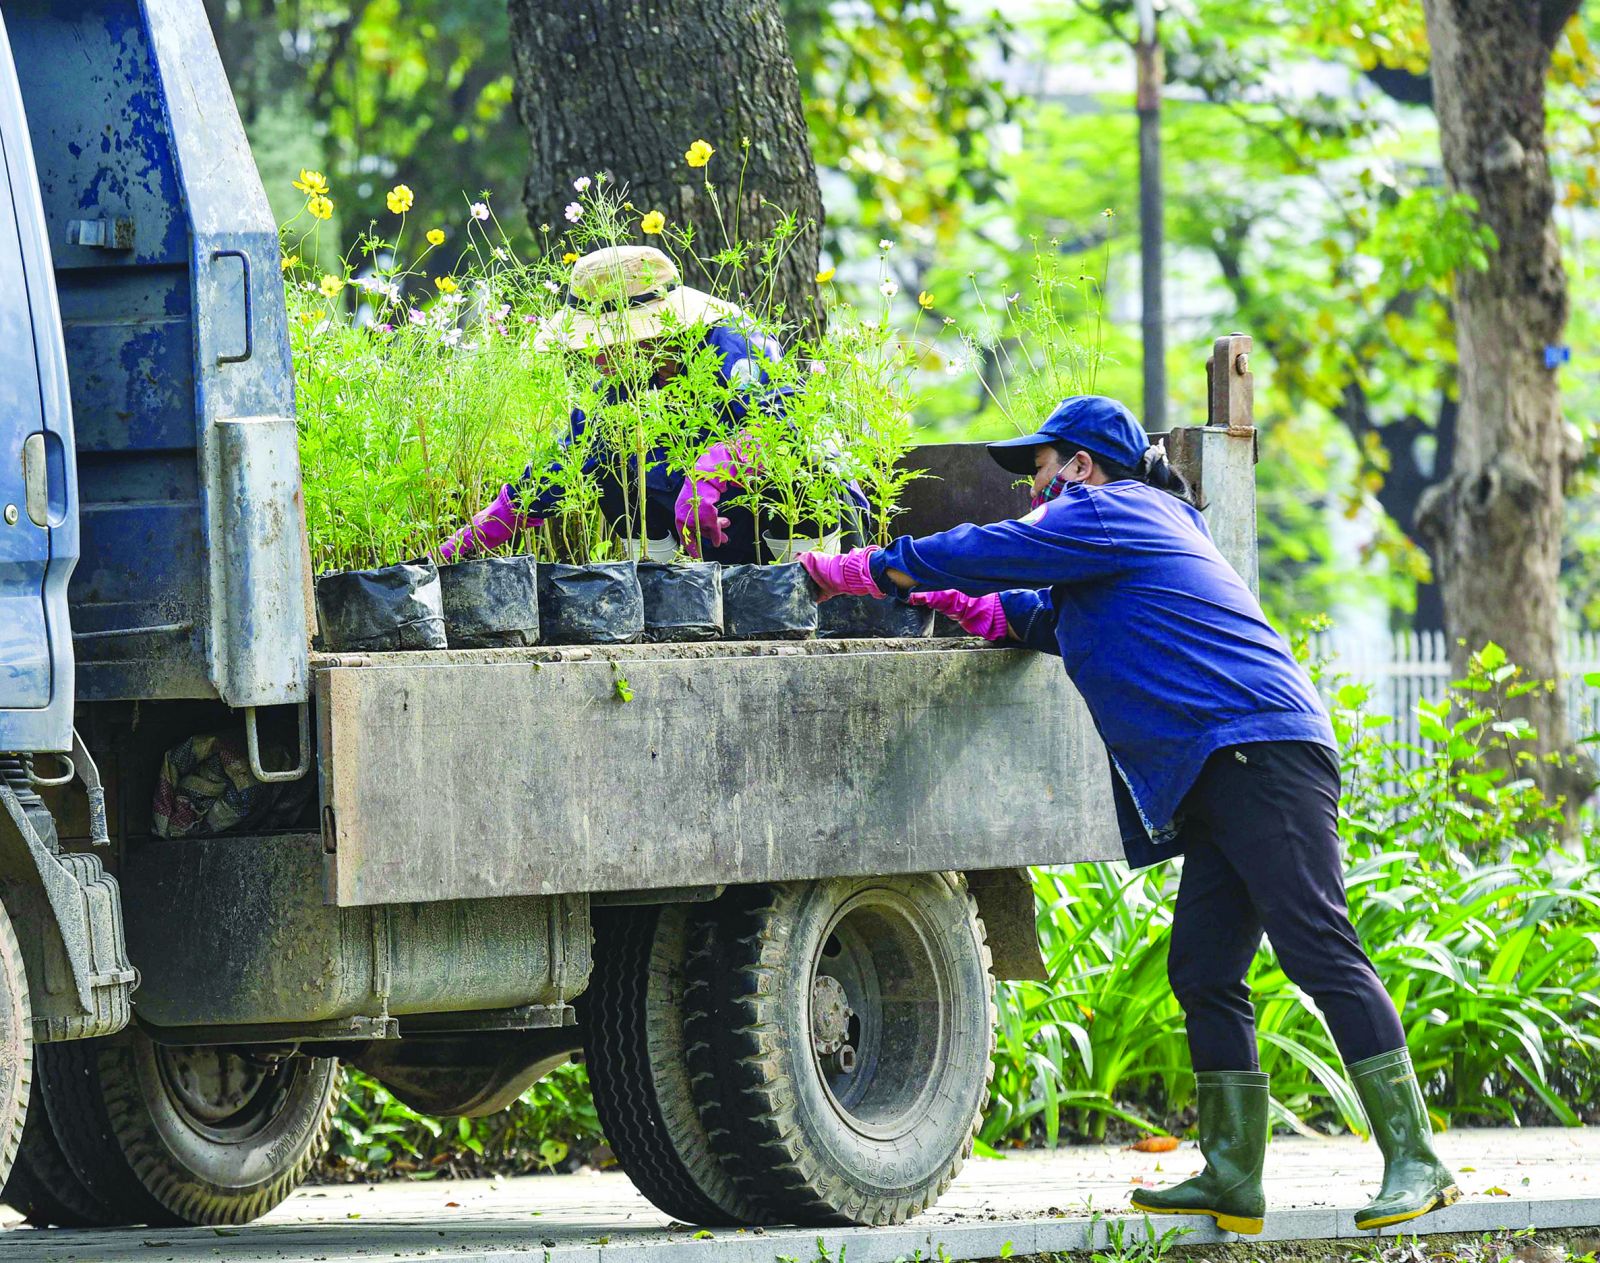 Moving flowers and plants to the streets